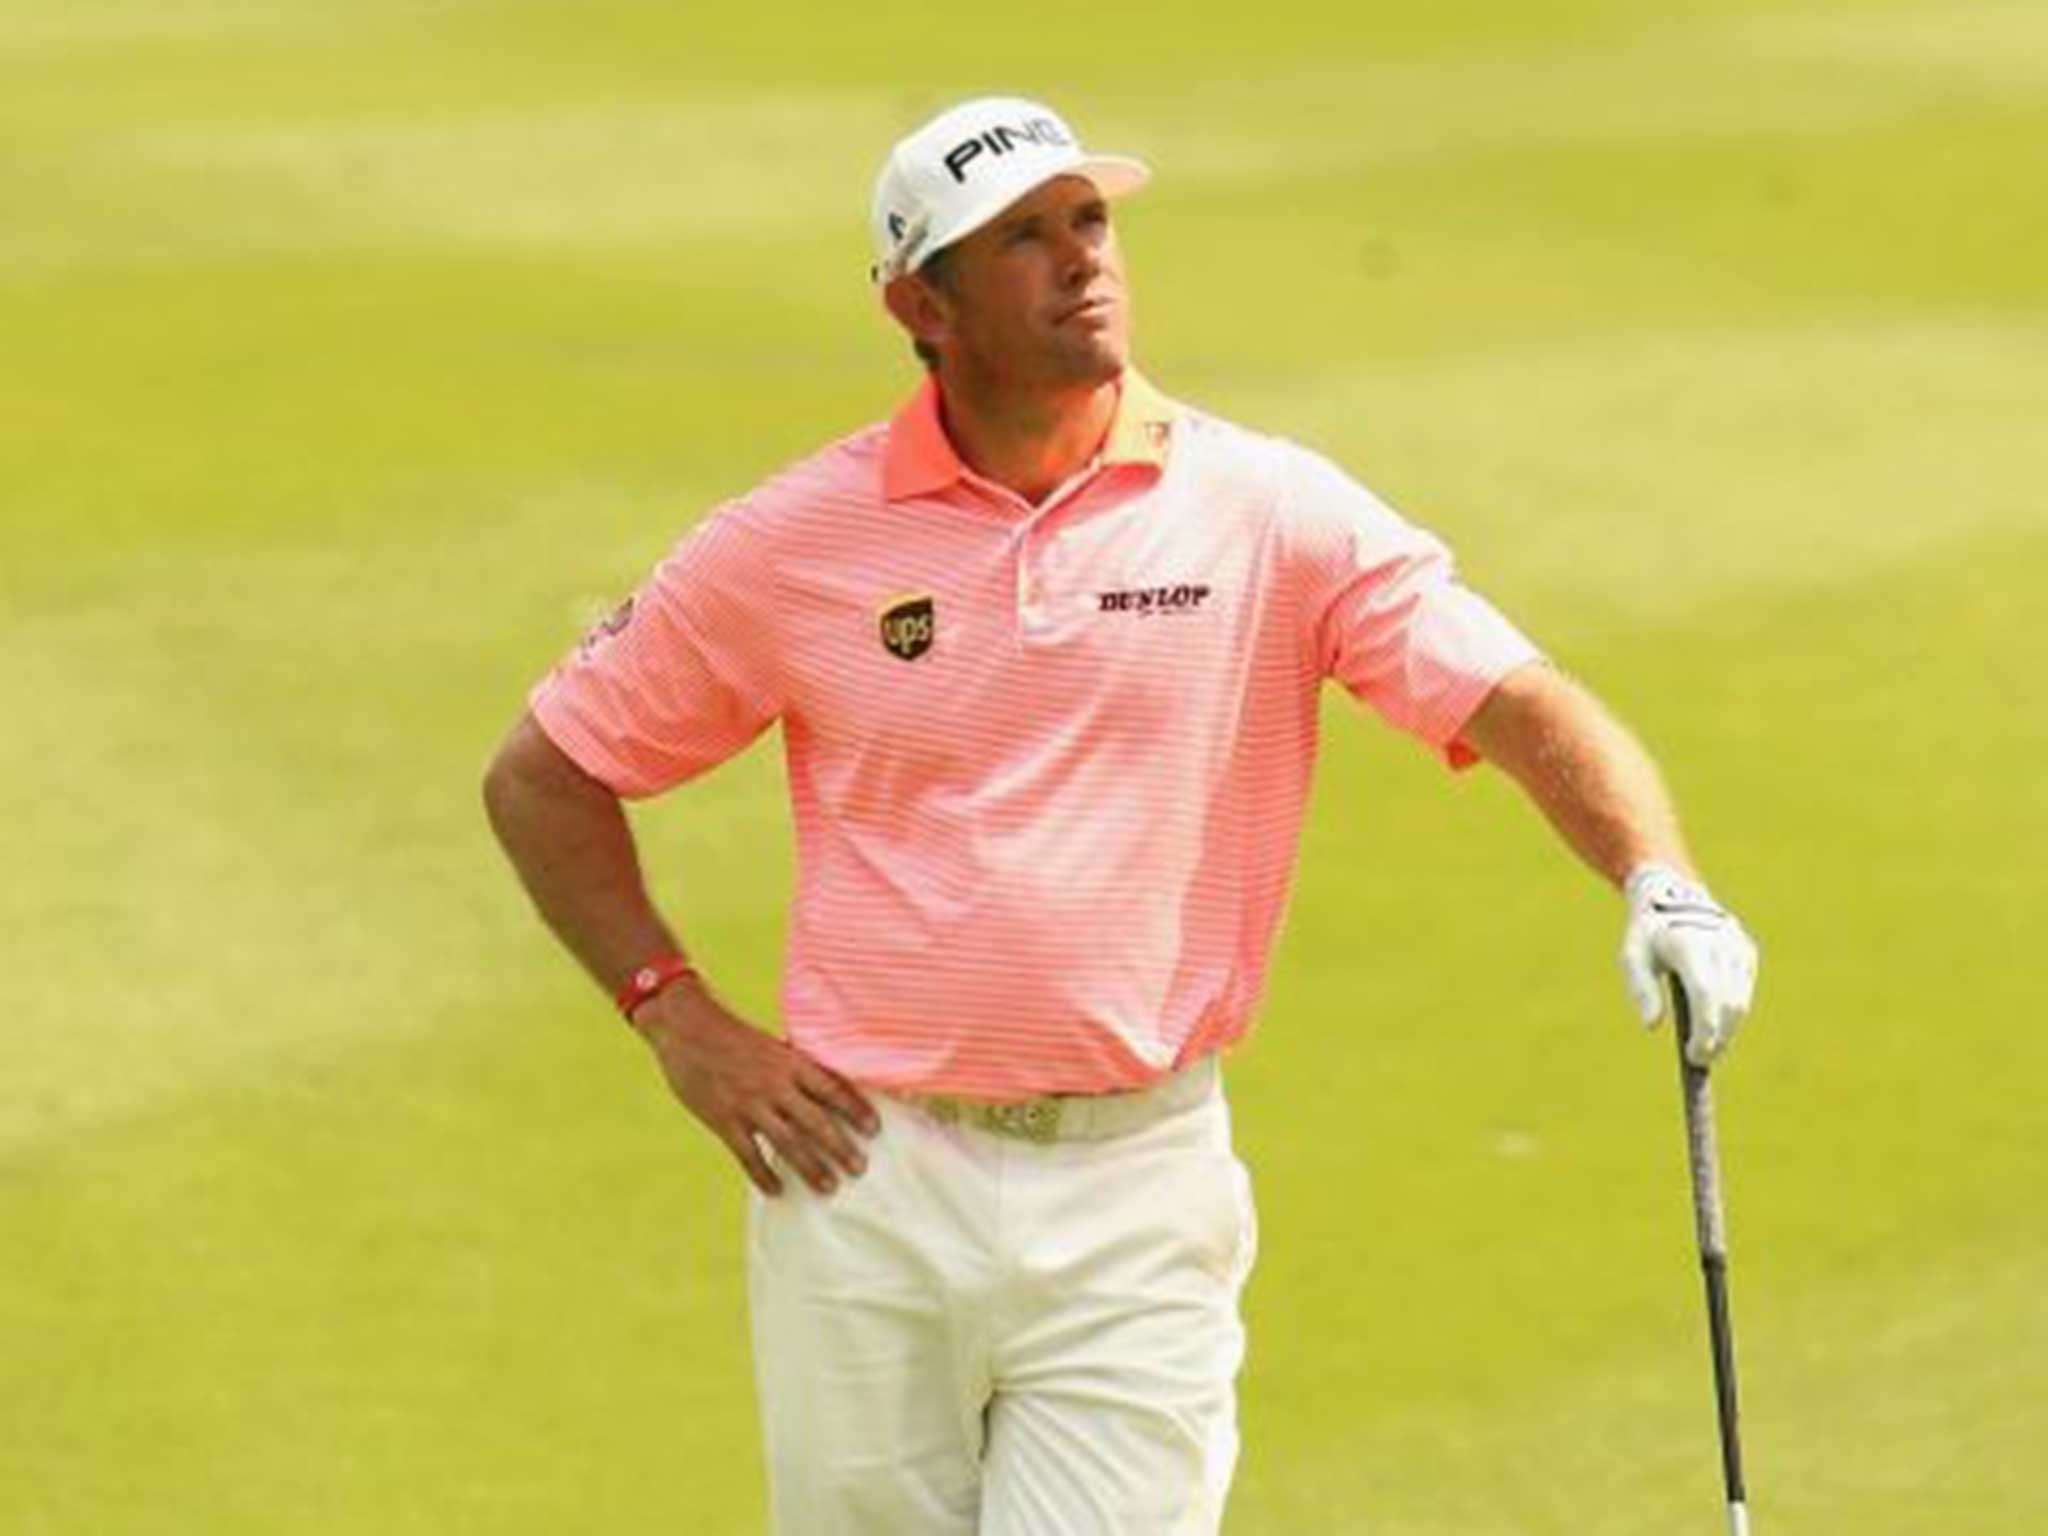 Lee Westwood shares the lead in the Malaysian Open in Kuala Lumpur after a 66 and a 67